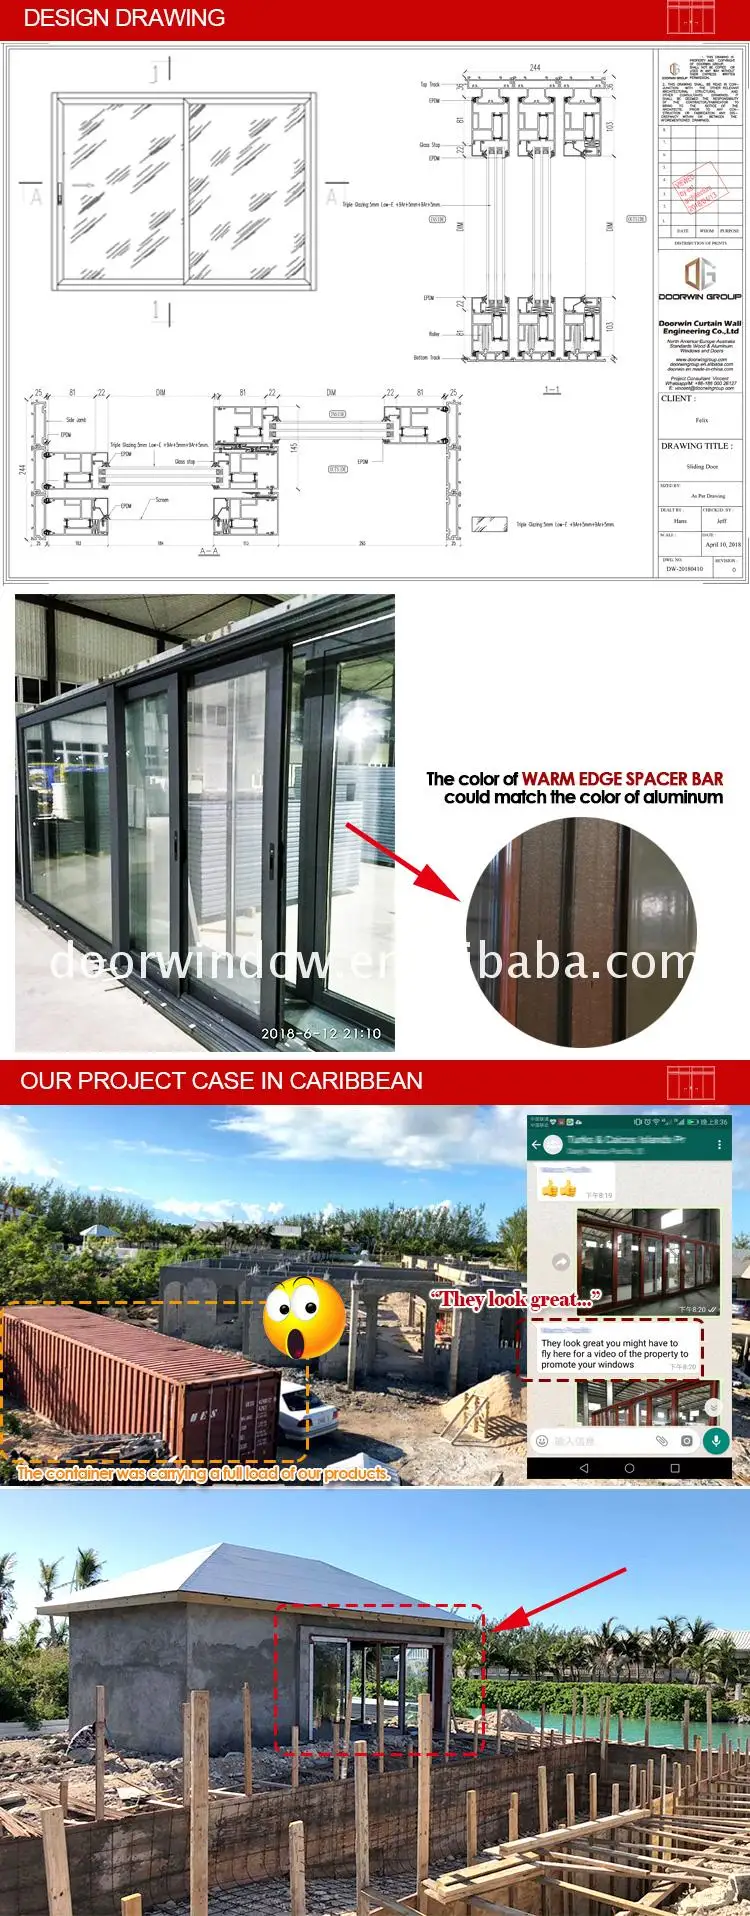 Aluminum sliding windows and doors with top quality tempered low-e toughen glass